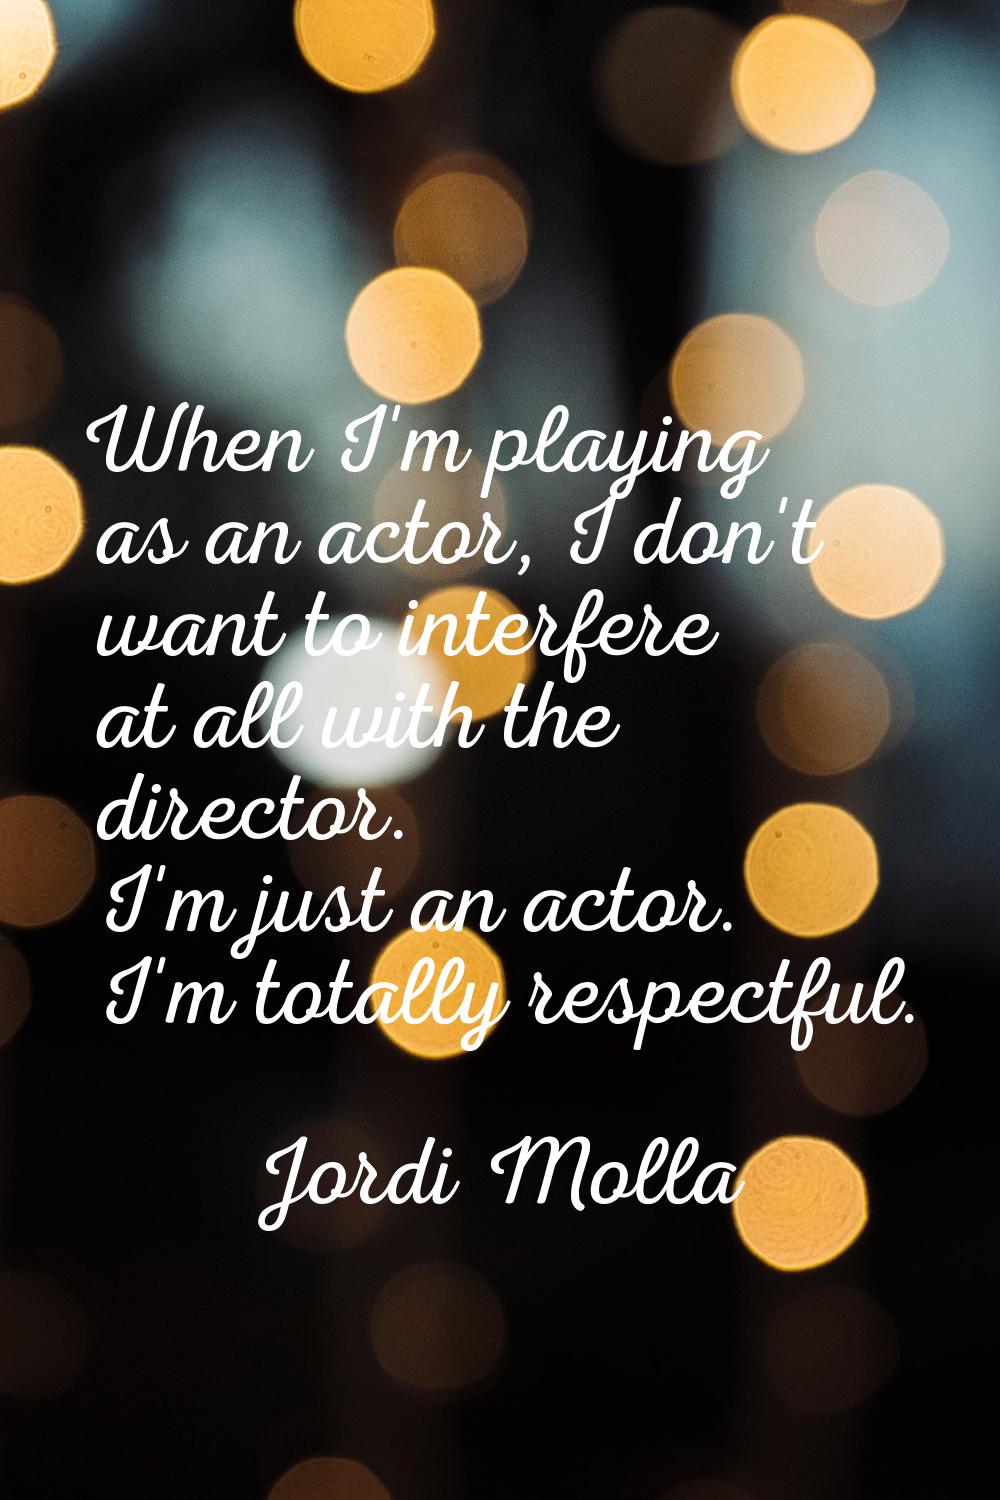 When I'm playing as an actor, I don't want to interfere at all with the director. I'm just an actor